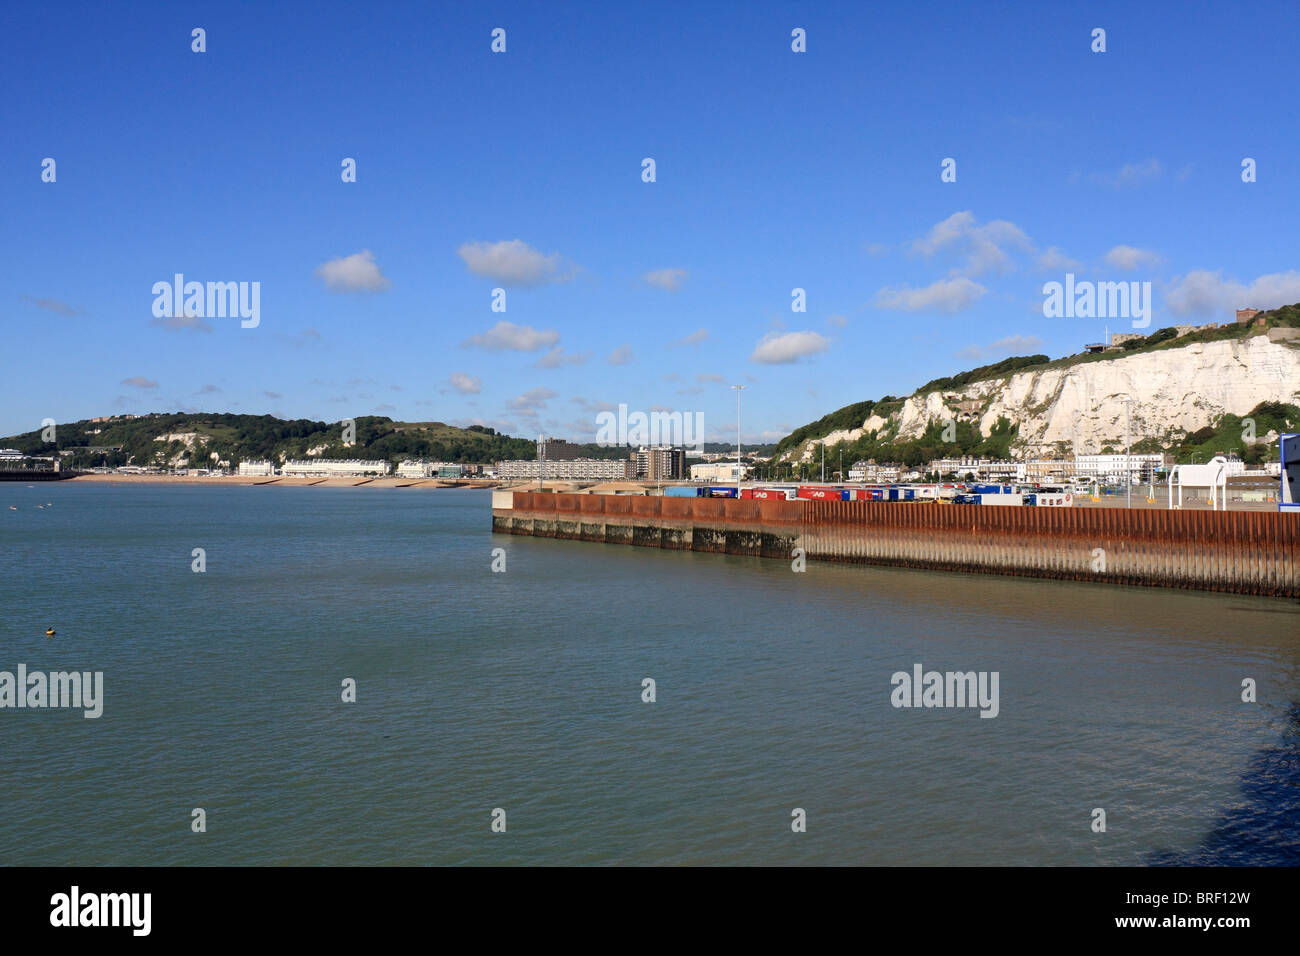 Views of the coastline of Dover the ferry port and the English Channel from Sea France passenger ferry, Summer 2010. Stock Photo